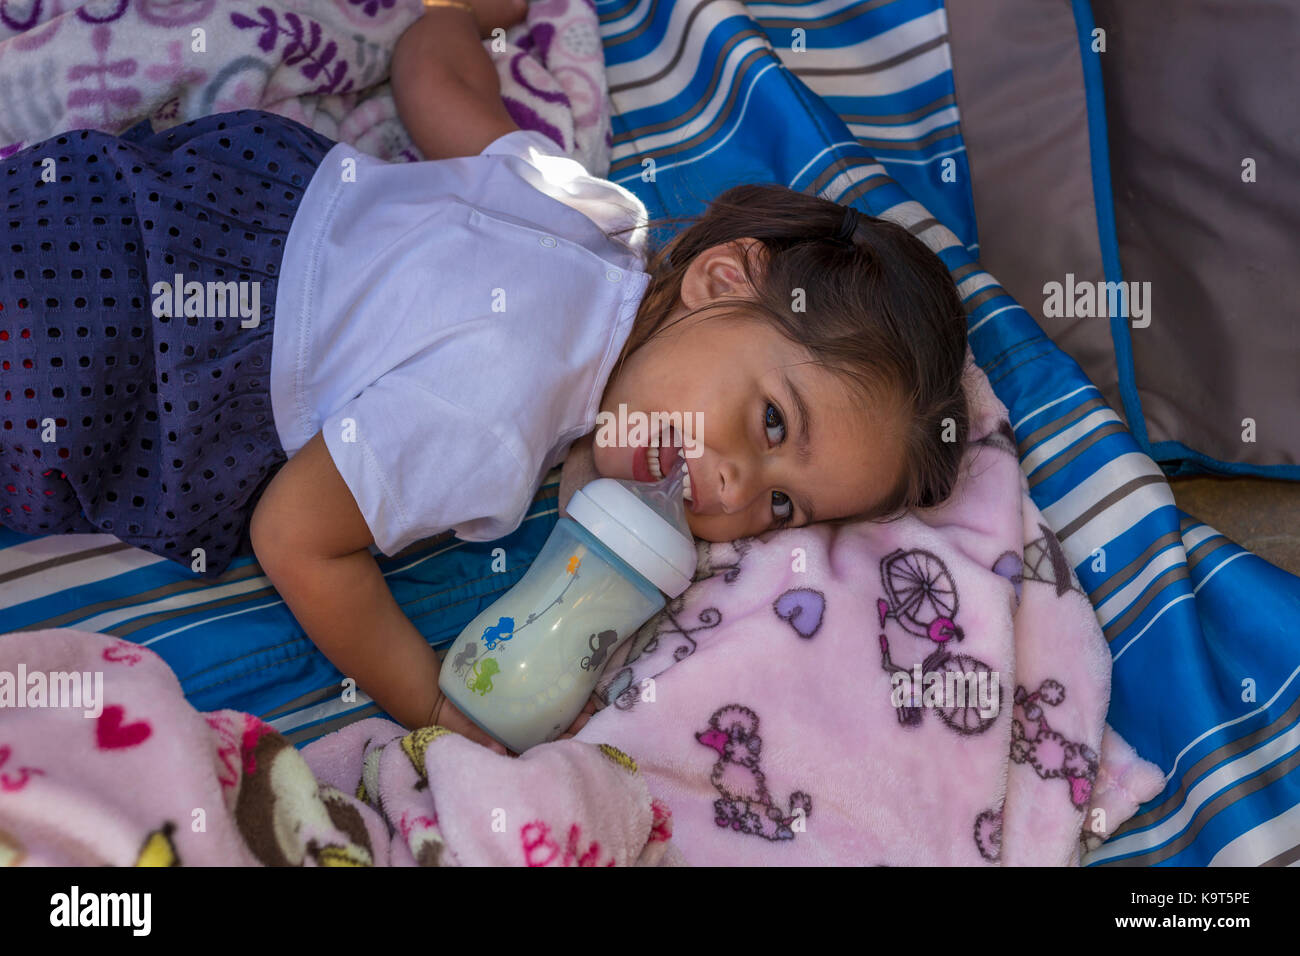 1, one, Hispanic girl, baby girl drinking from baby bottle, toddler, Castro Valley, Alameda County, California, United States, North America Stock Photo